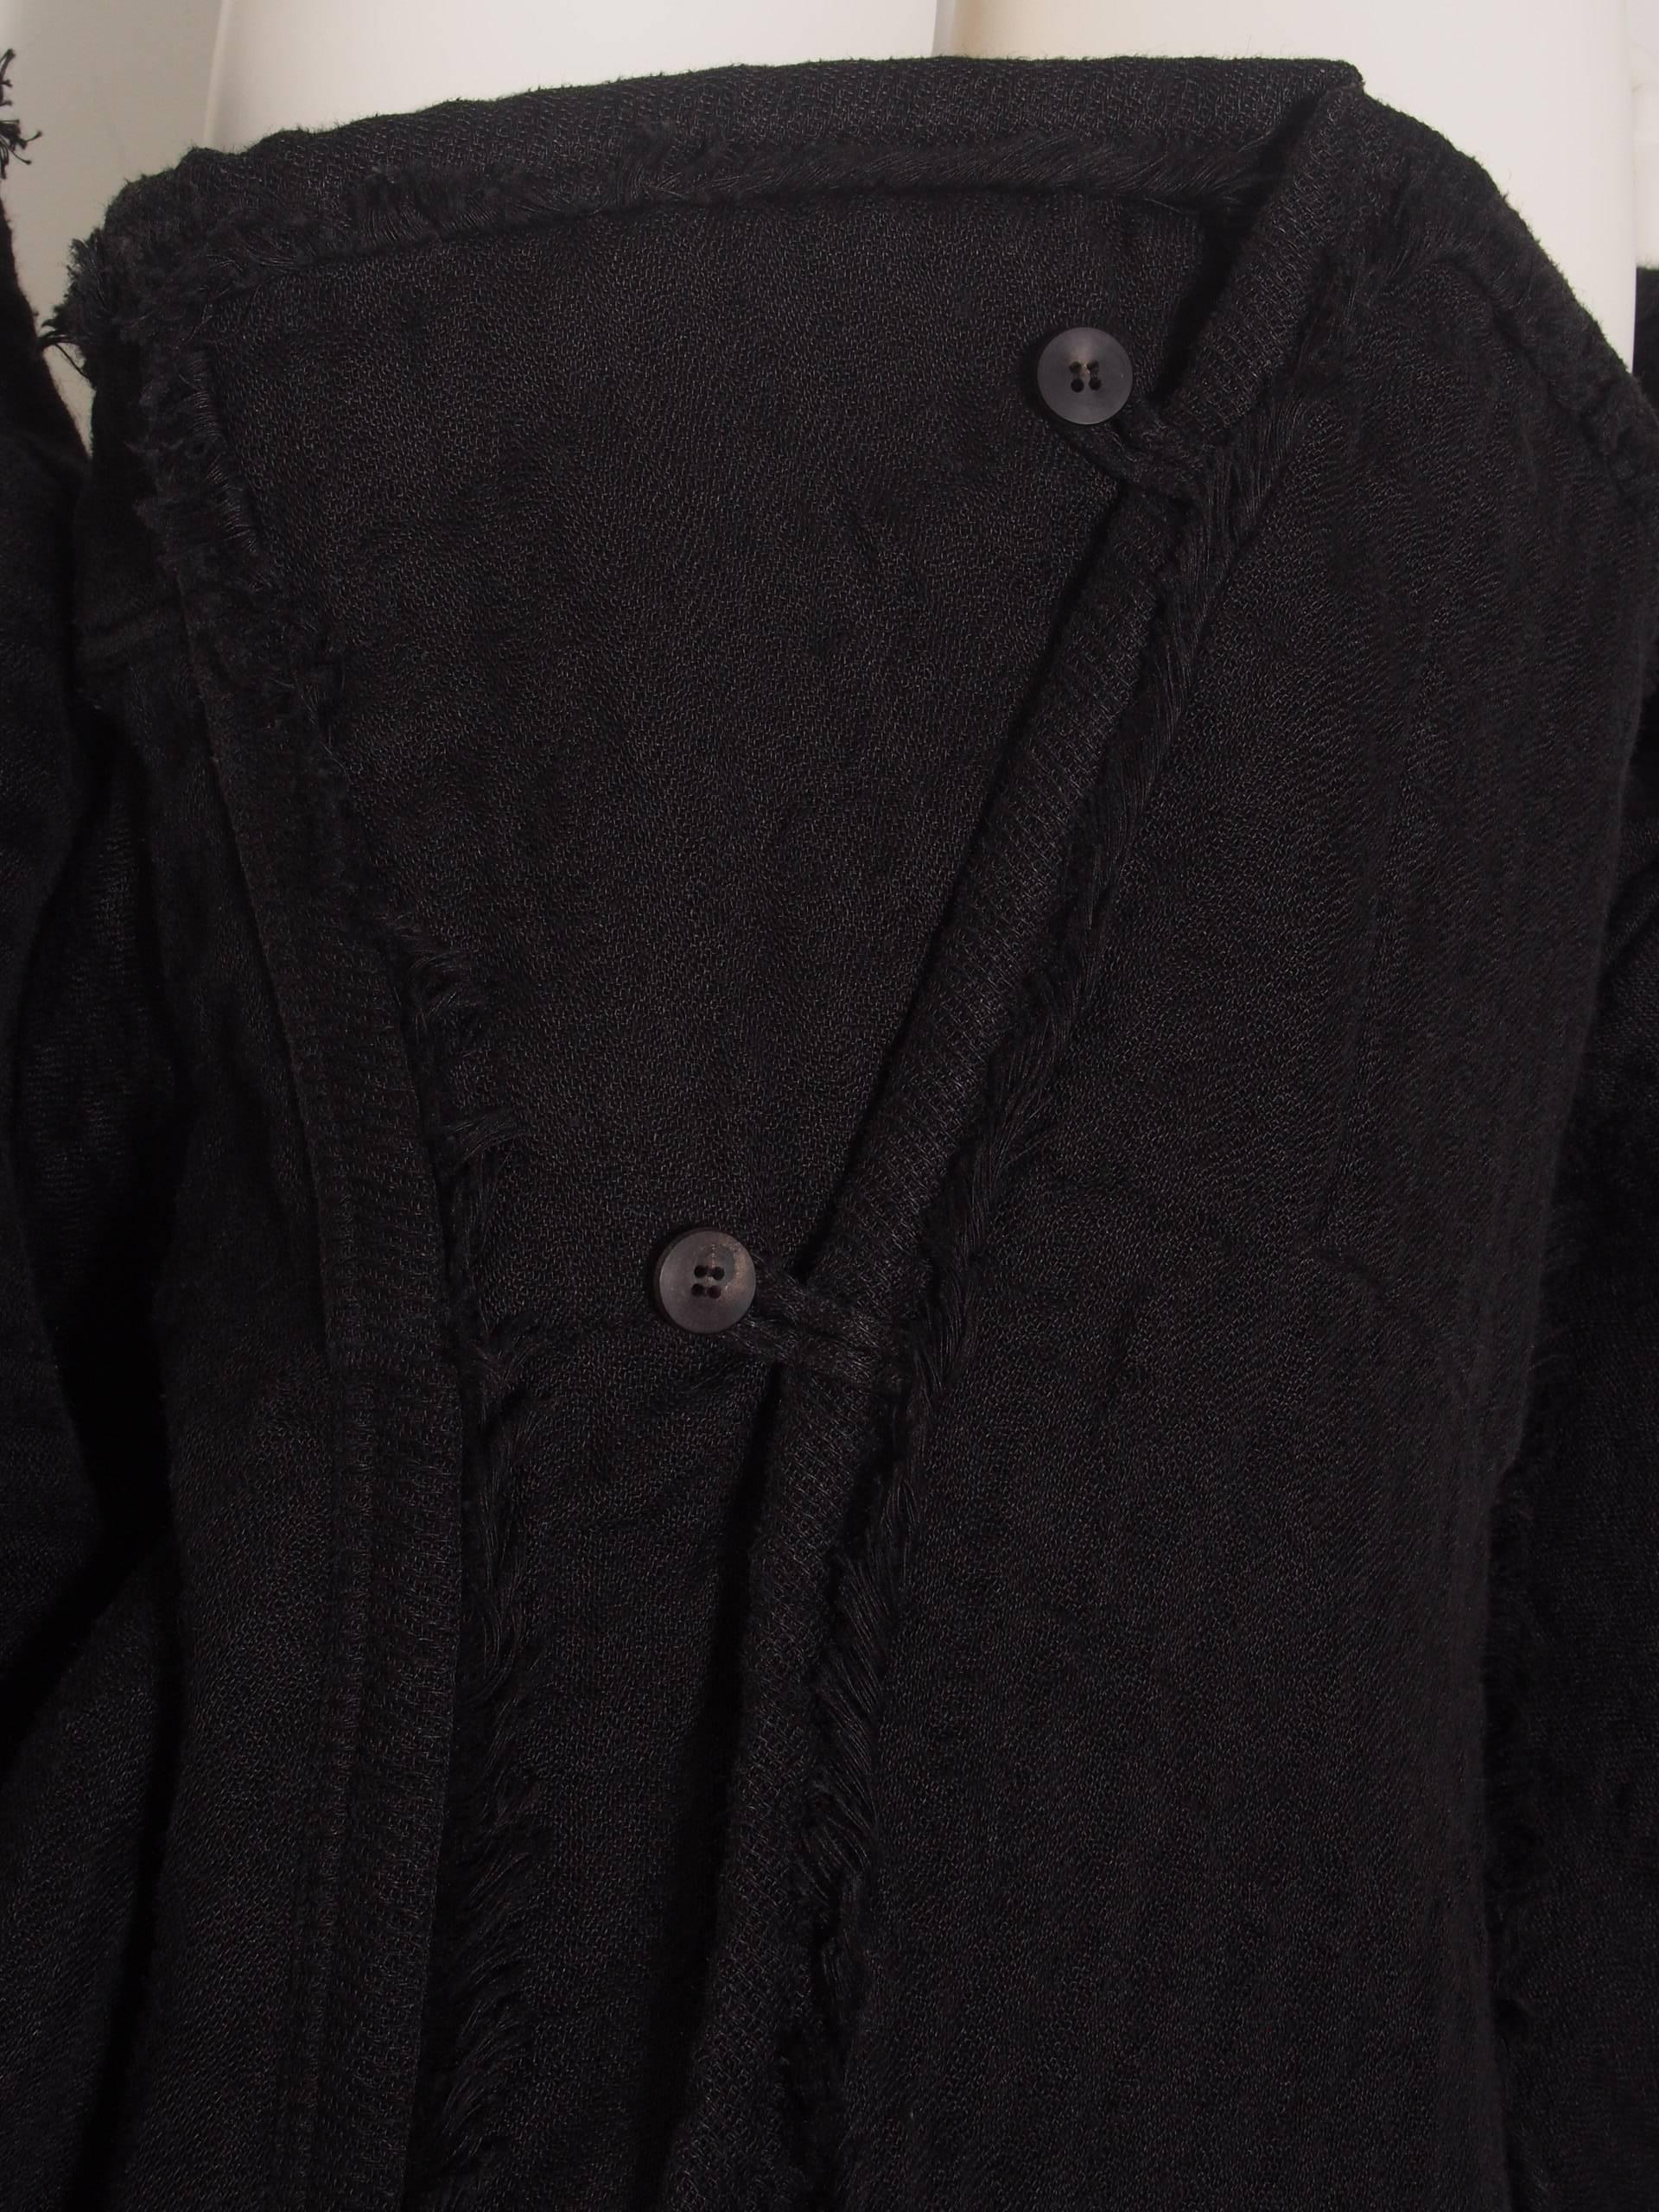 Black Issey Miyake Batwing Woven Jacket For Sale